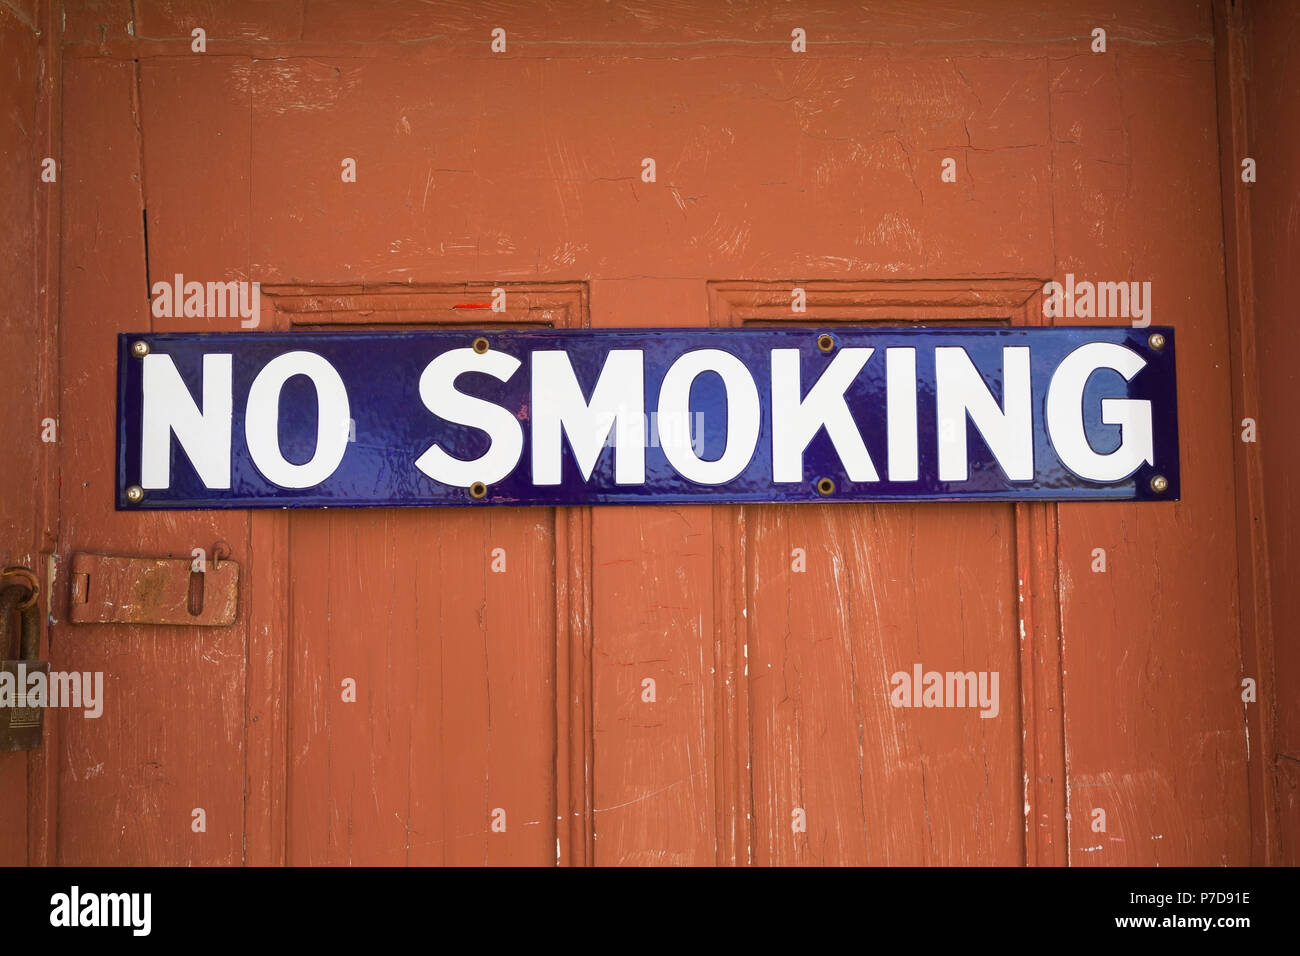 White and blue No Smoking sign on reddish brown wooden entrance door, Quebec, Canada Stock Photo